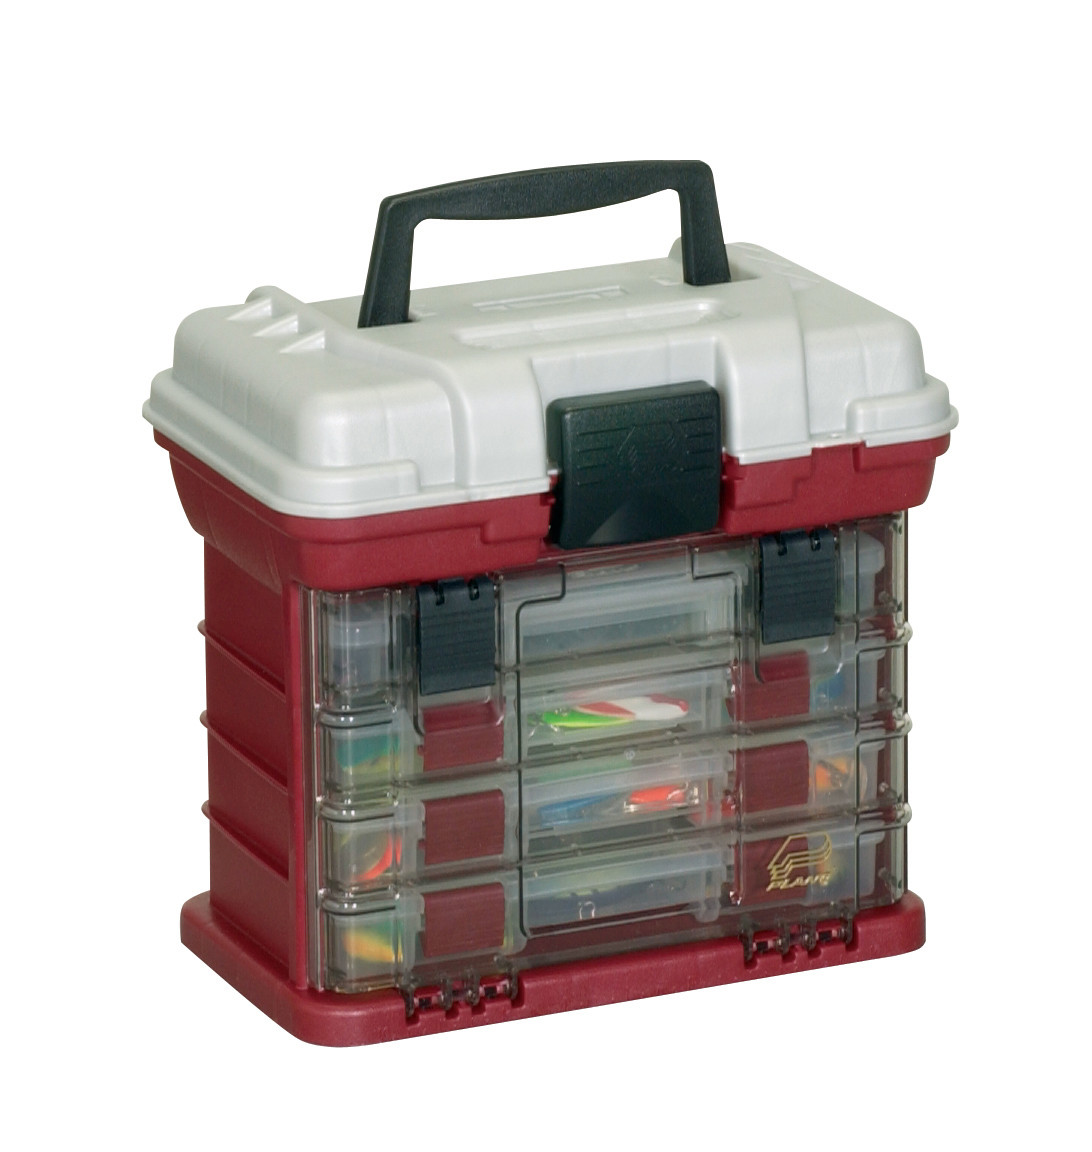 Jarvis Walker 2-Tray Clear-Top Tackle Box - Jarvis Walker – Jarvis Walker  Brands